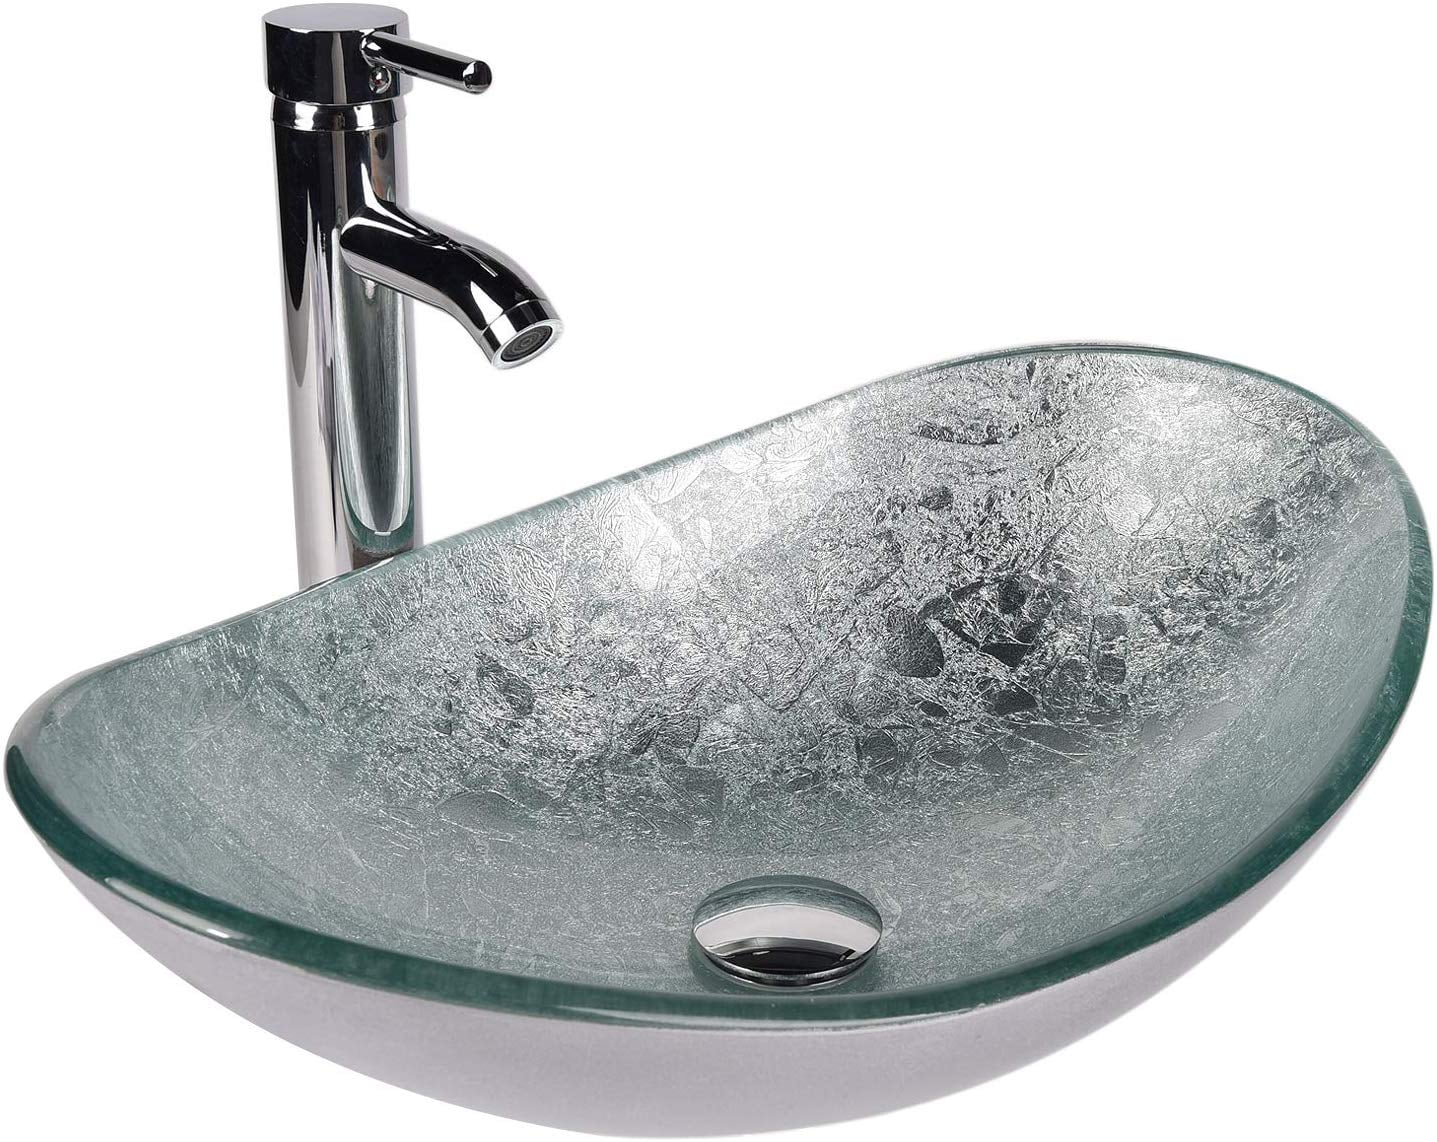 Bathroom Basin Oval Tempered Glass Bowl With Mixer Faucet Overmount Units 